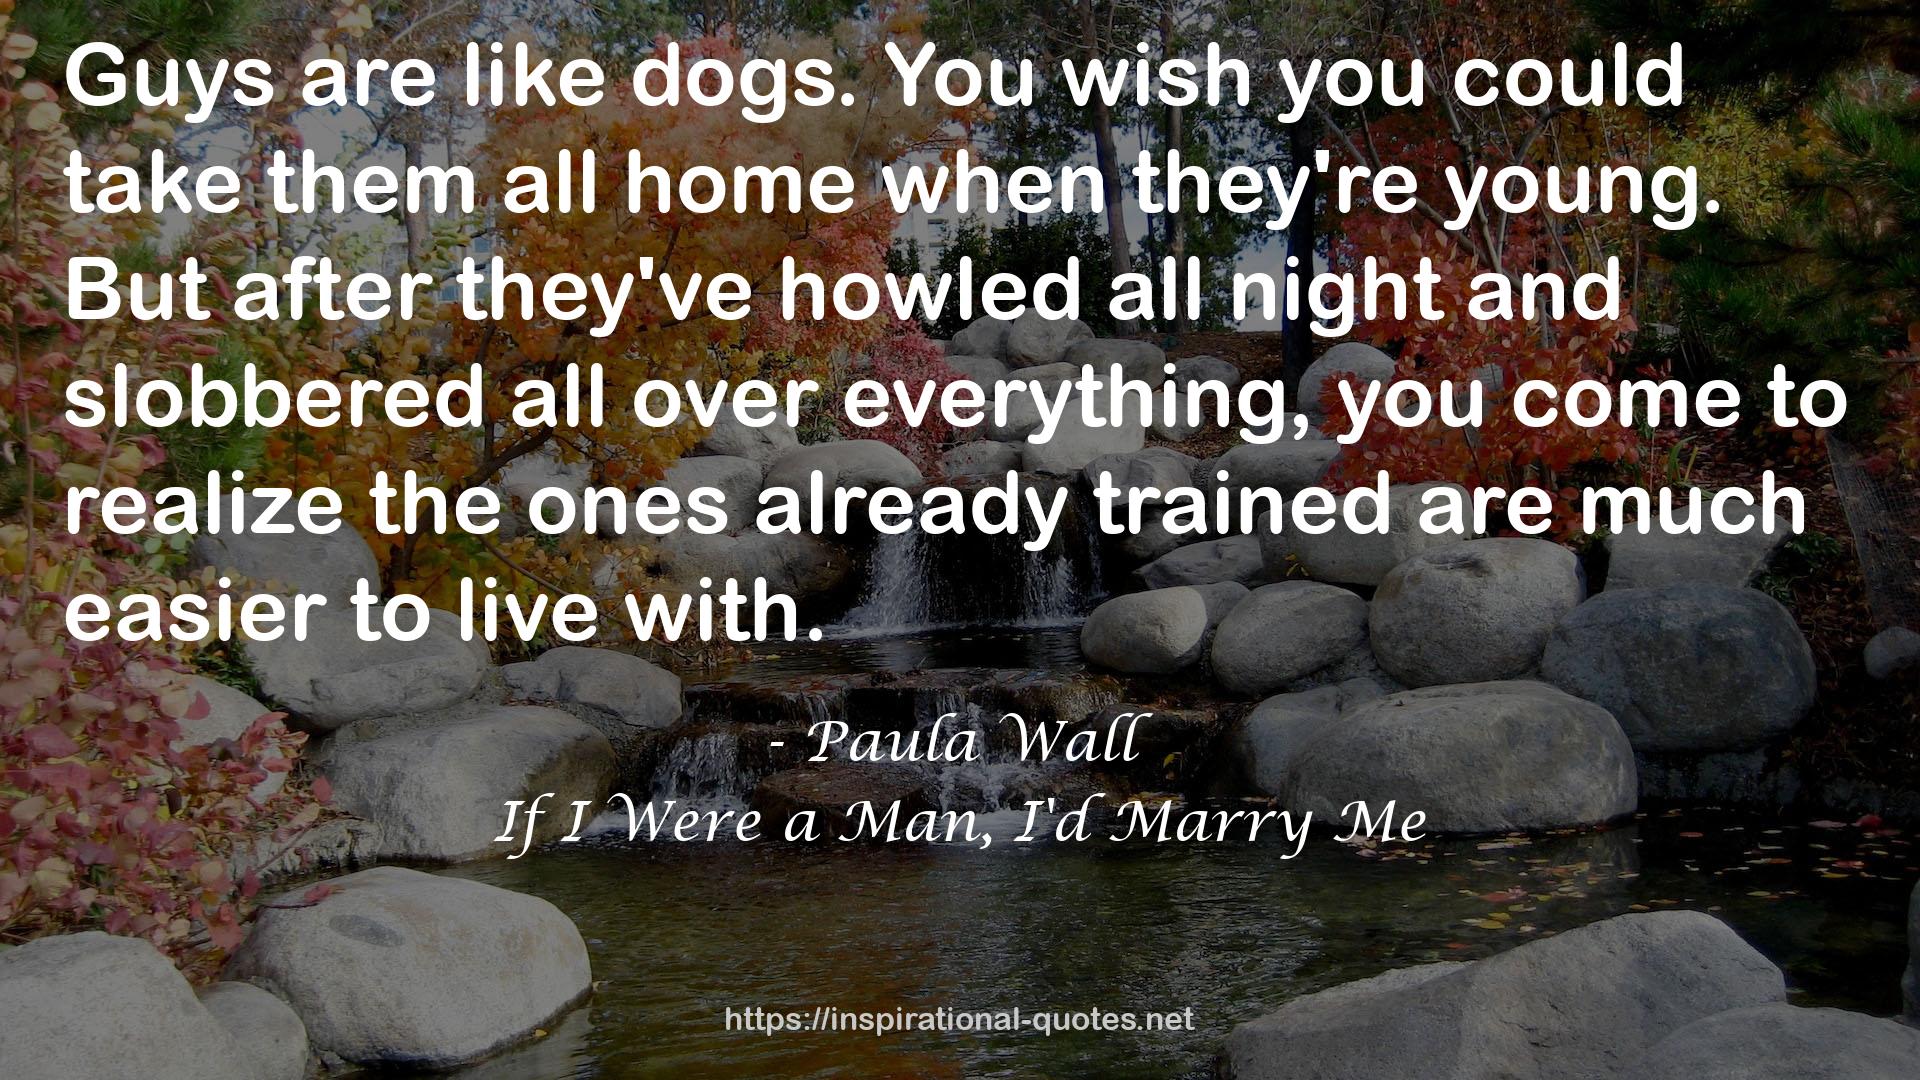 If I Were a Man, I'd Marry Me QUOTES